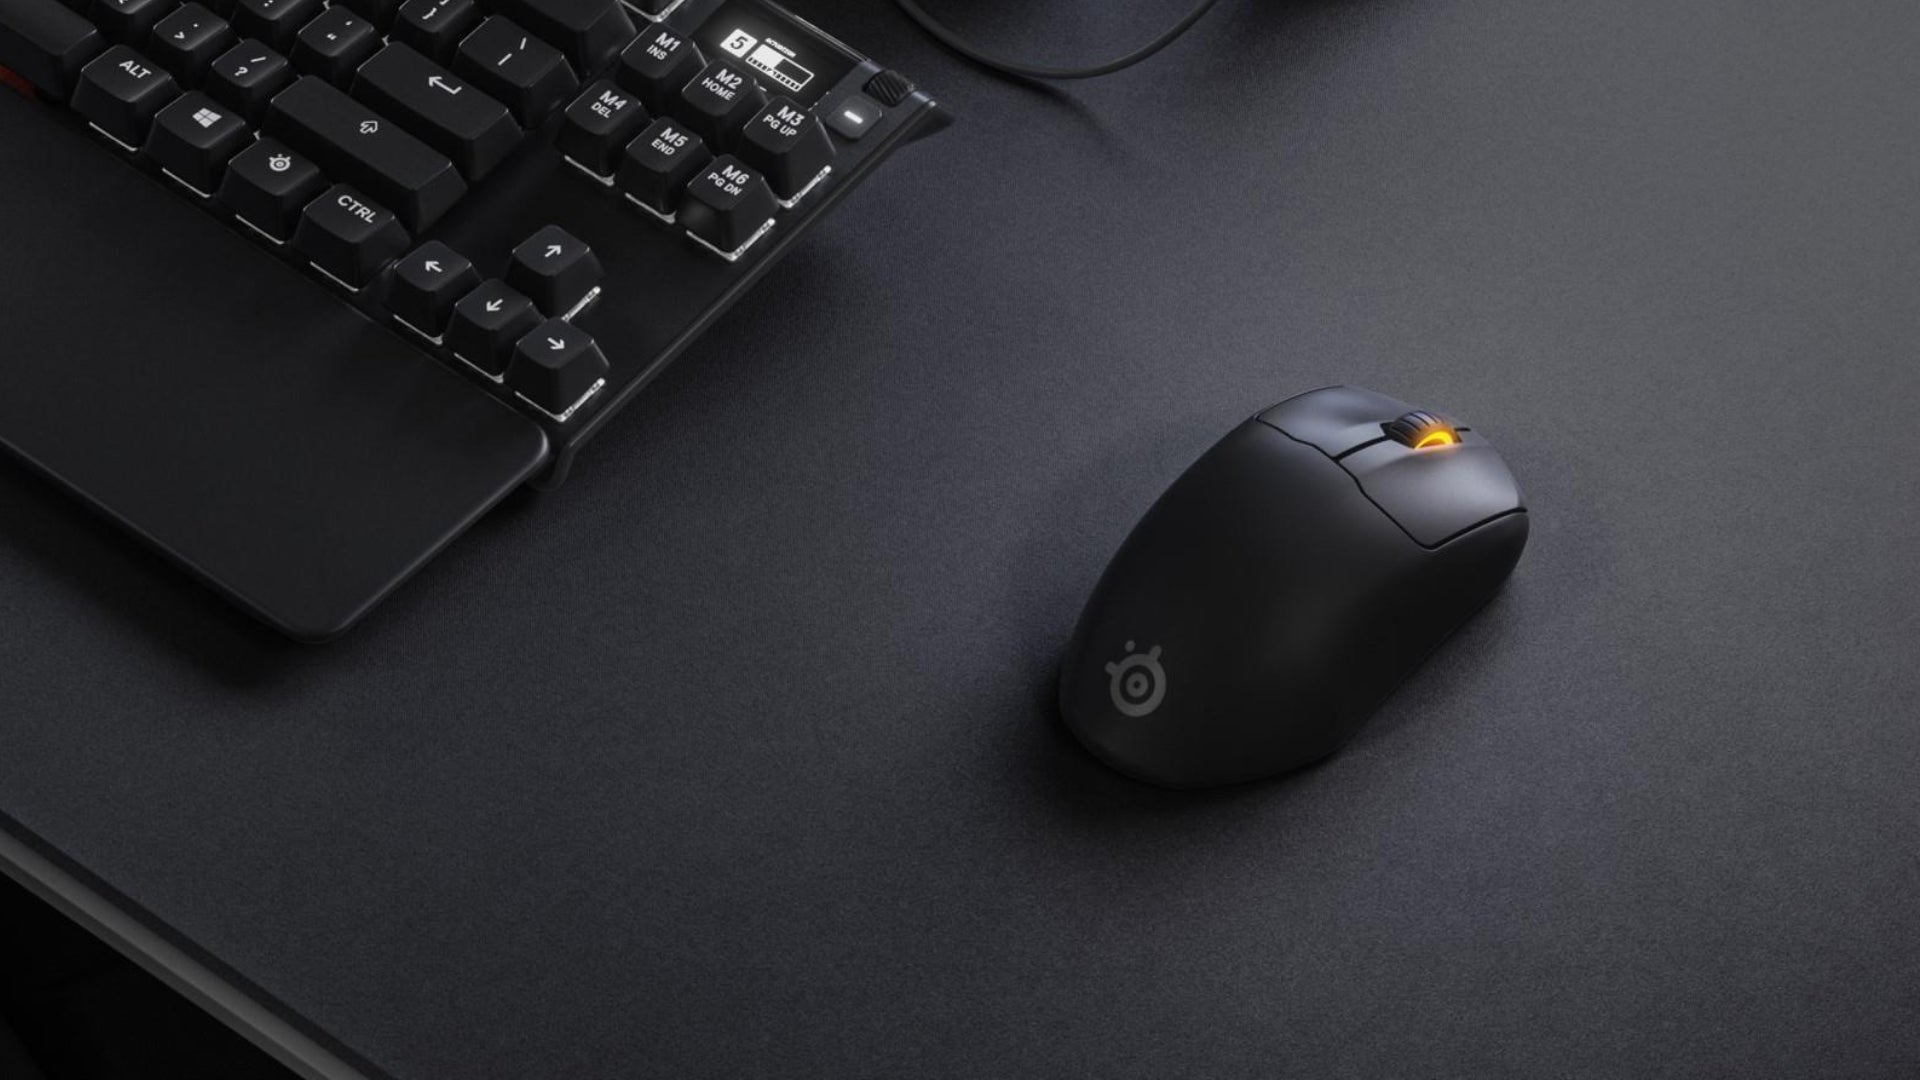 The SteelSeries Prime Mini gaming mouse on a desk next to a keyboard.